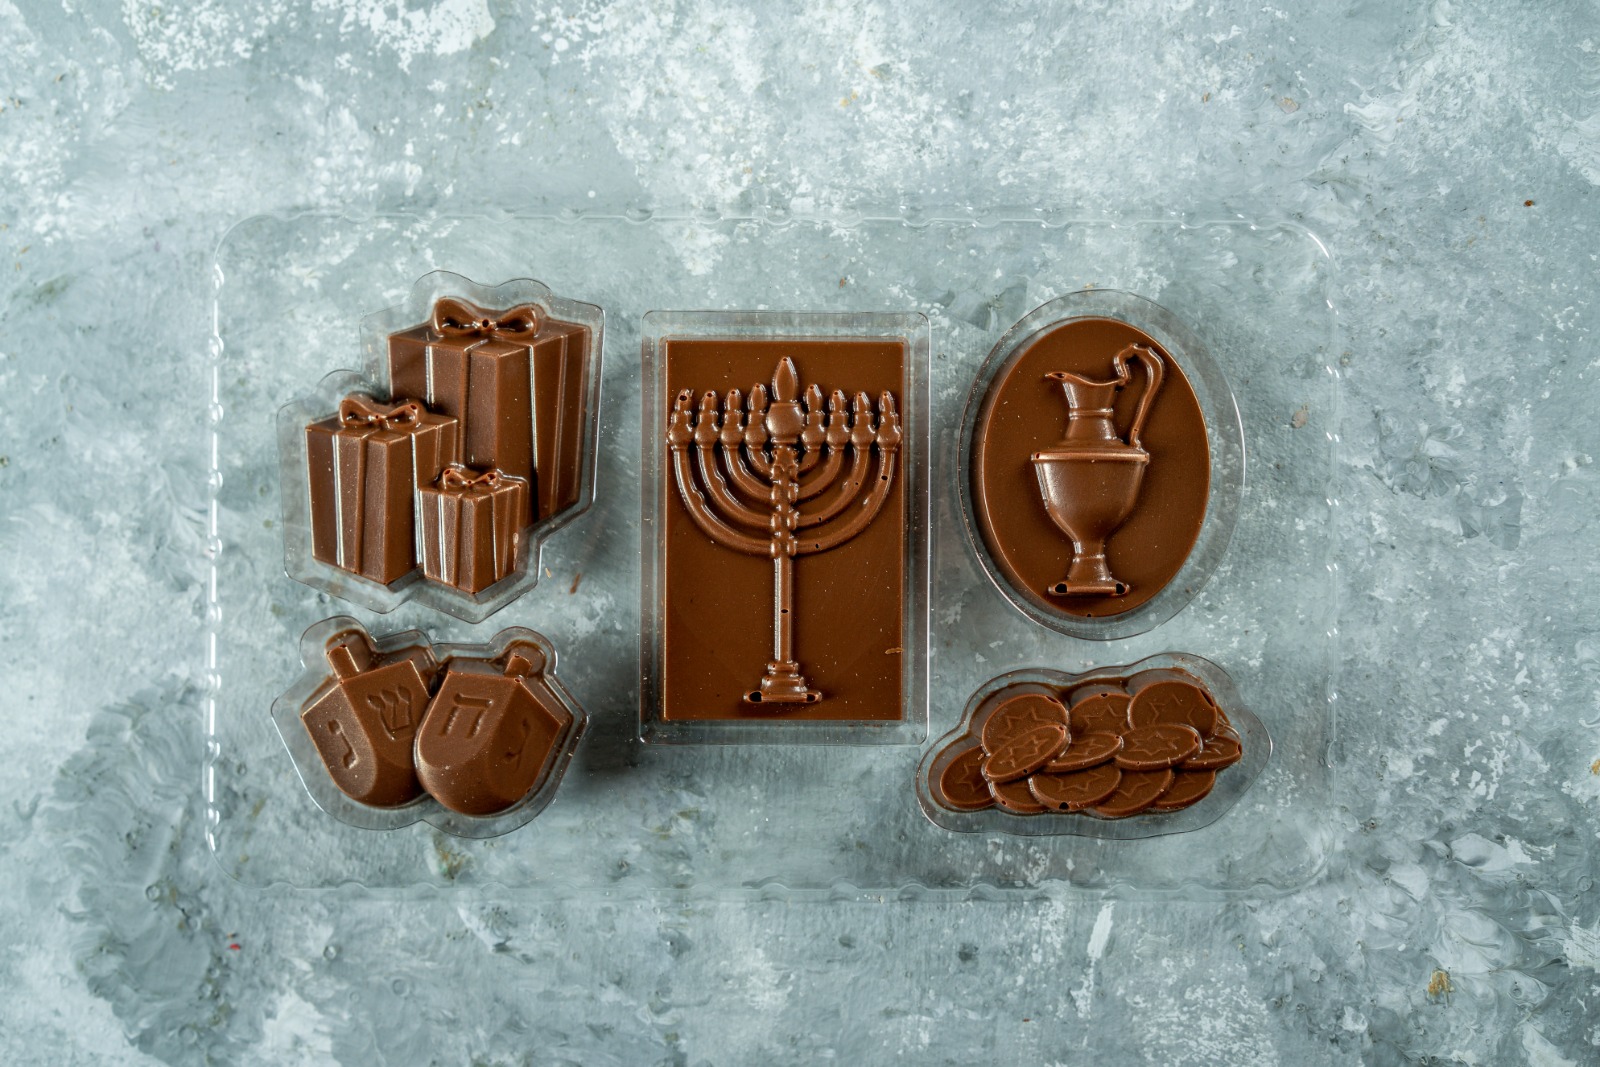 Chanukah-shaped delicious chocolate